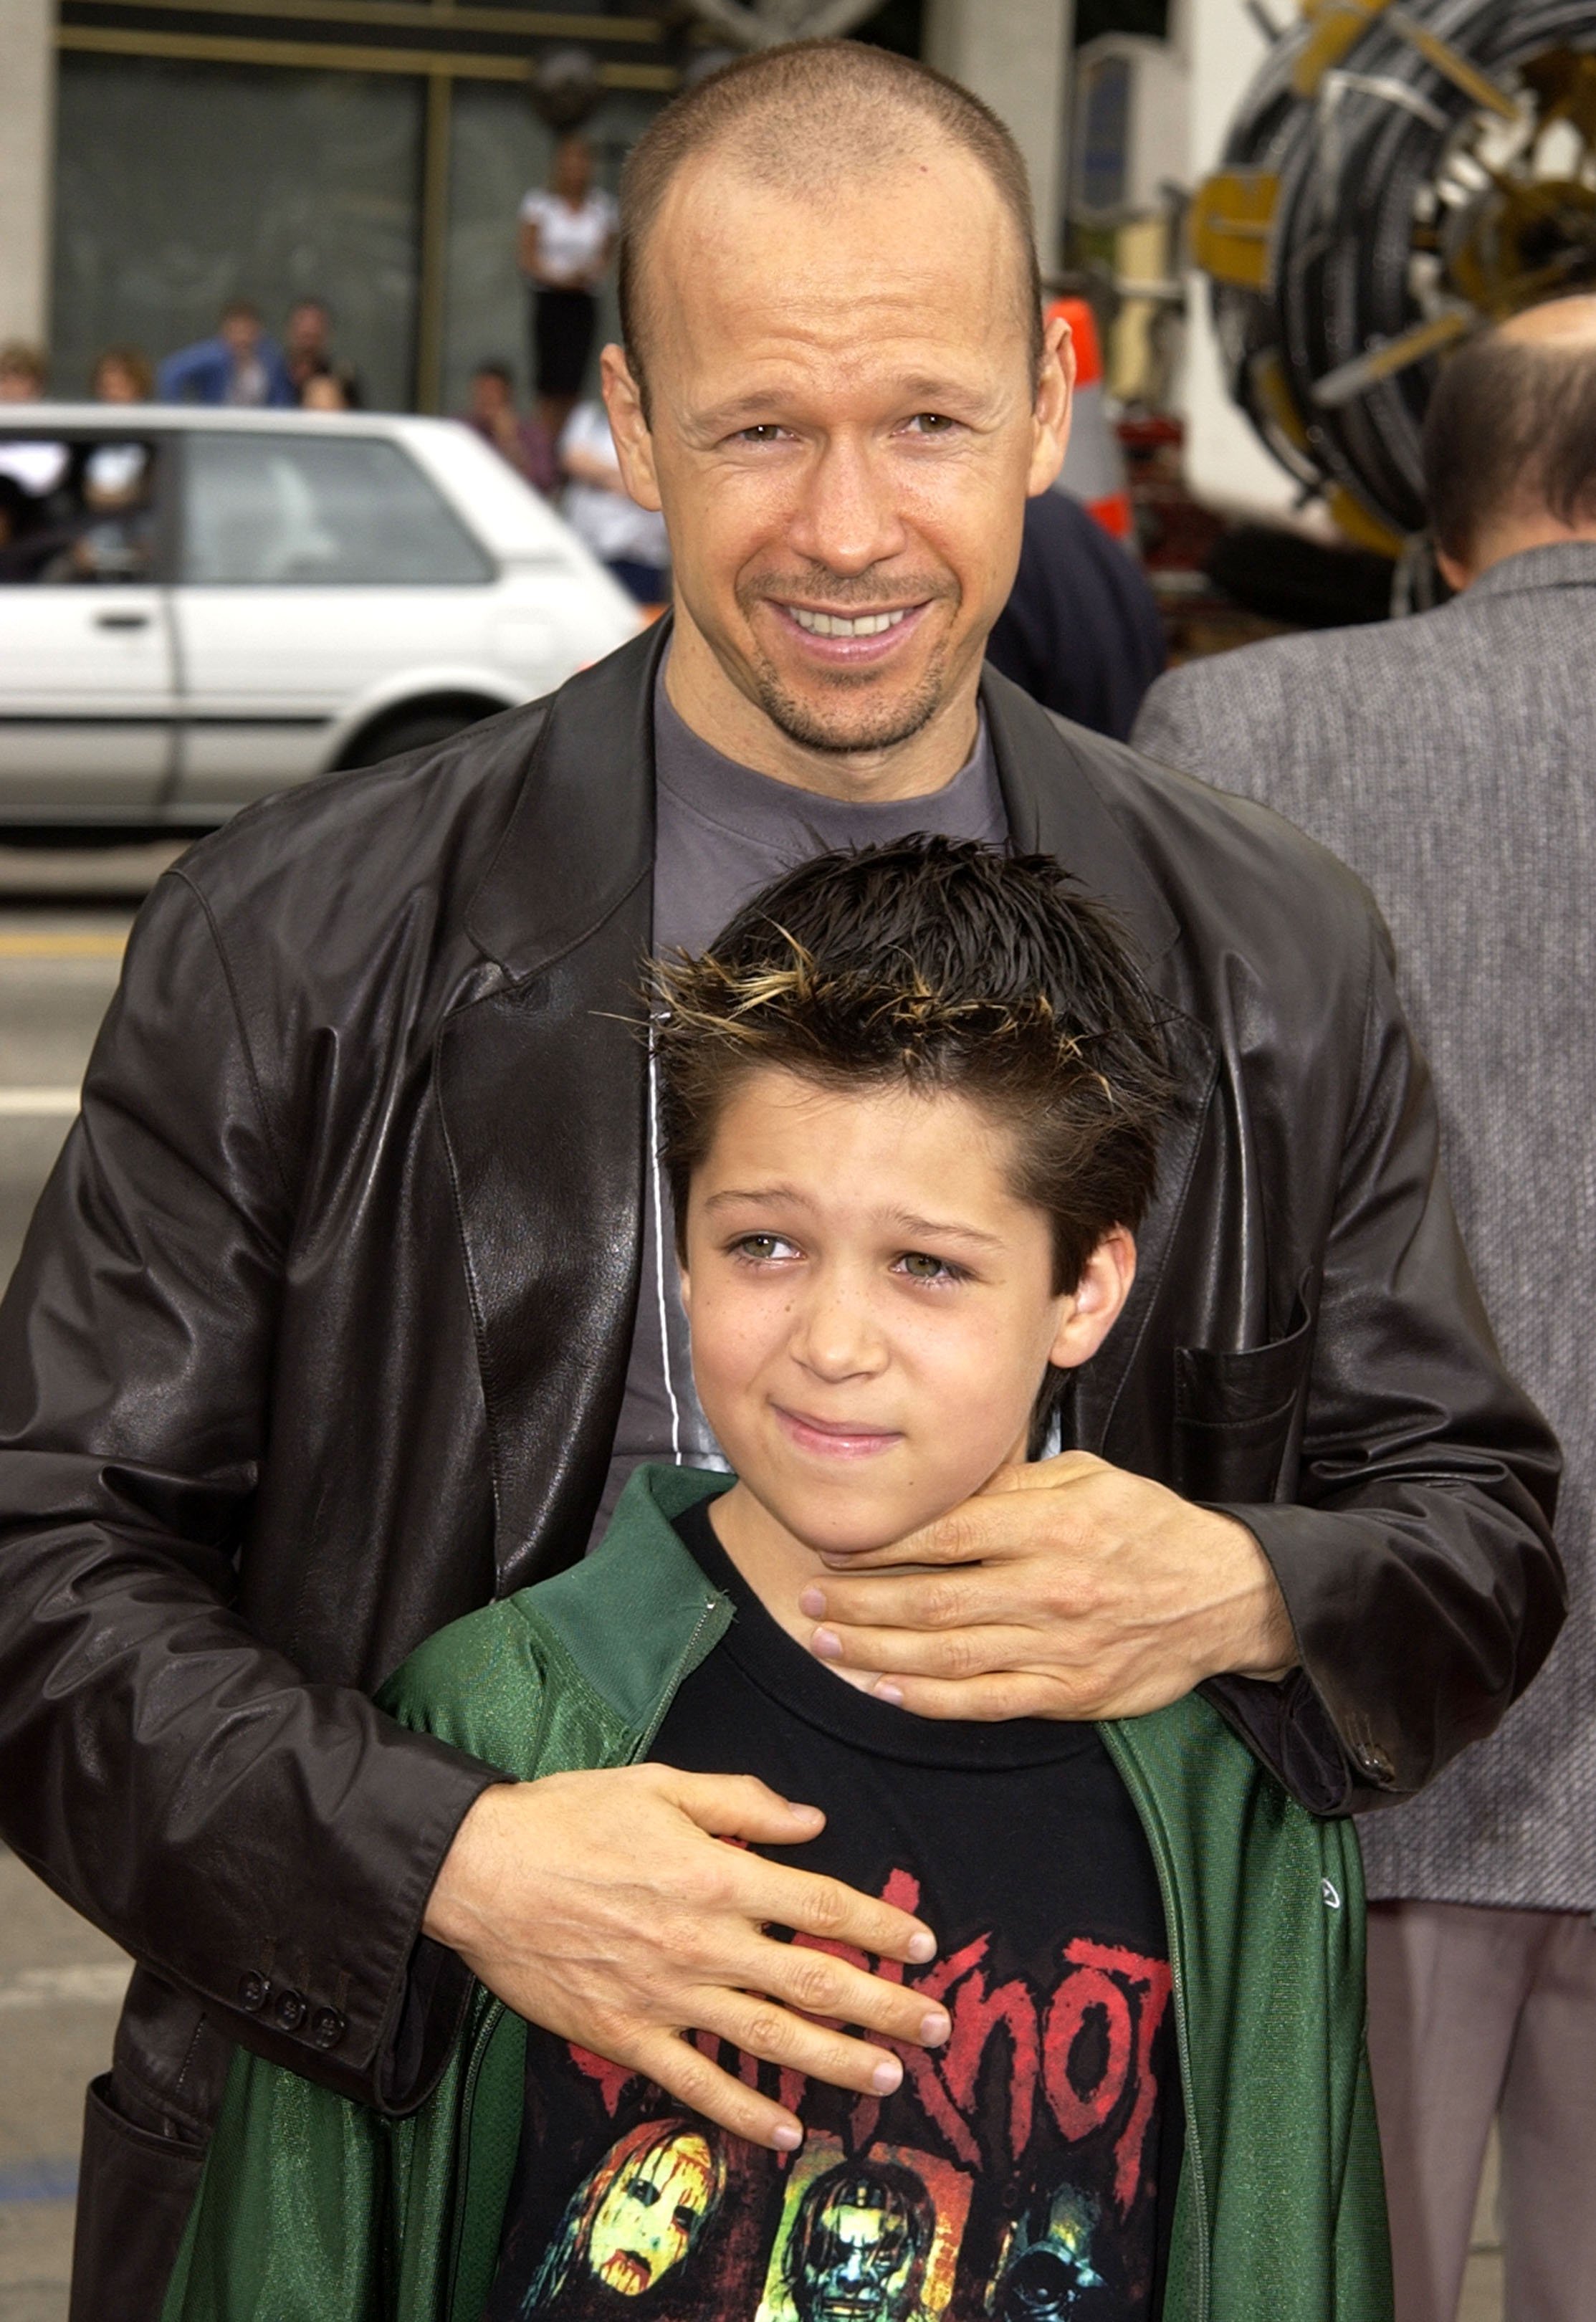 Donnie Wahlberg & son Xavier at an event | Photo: Getty Images